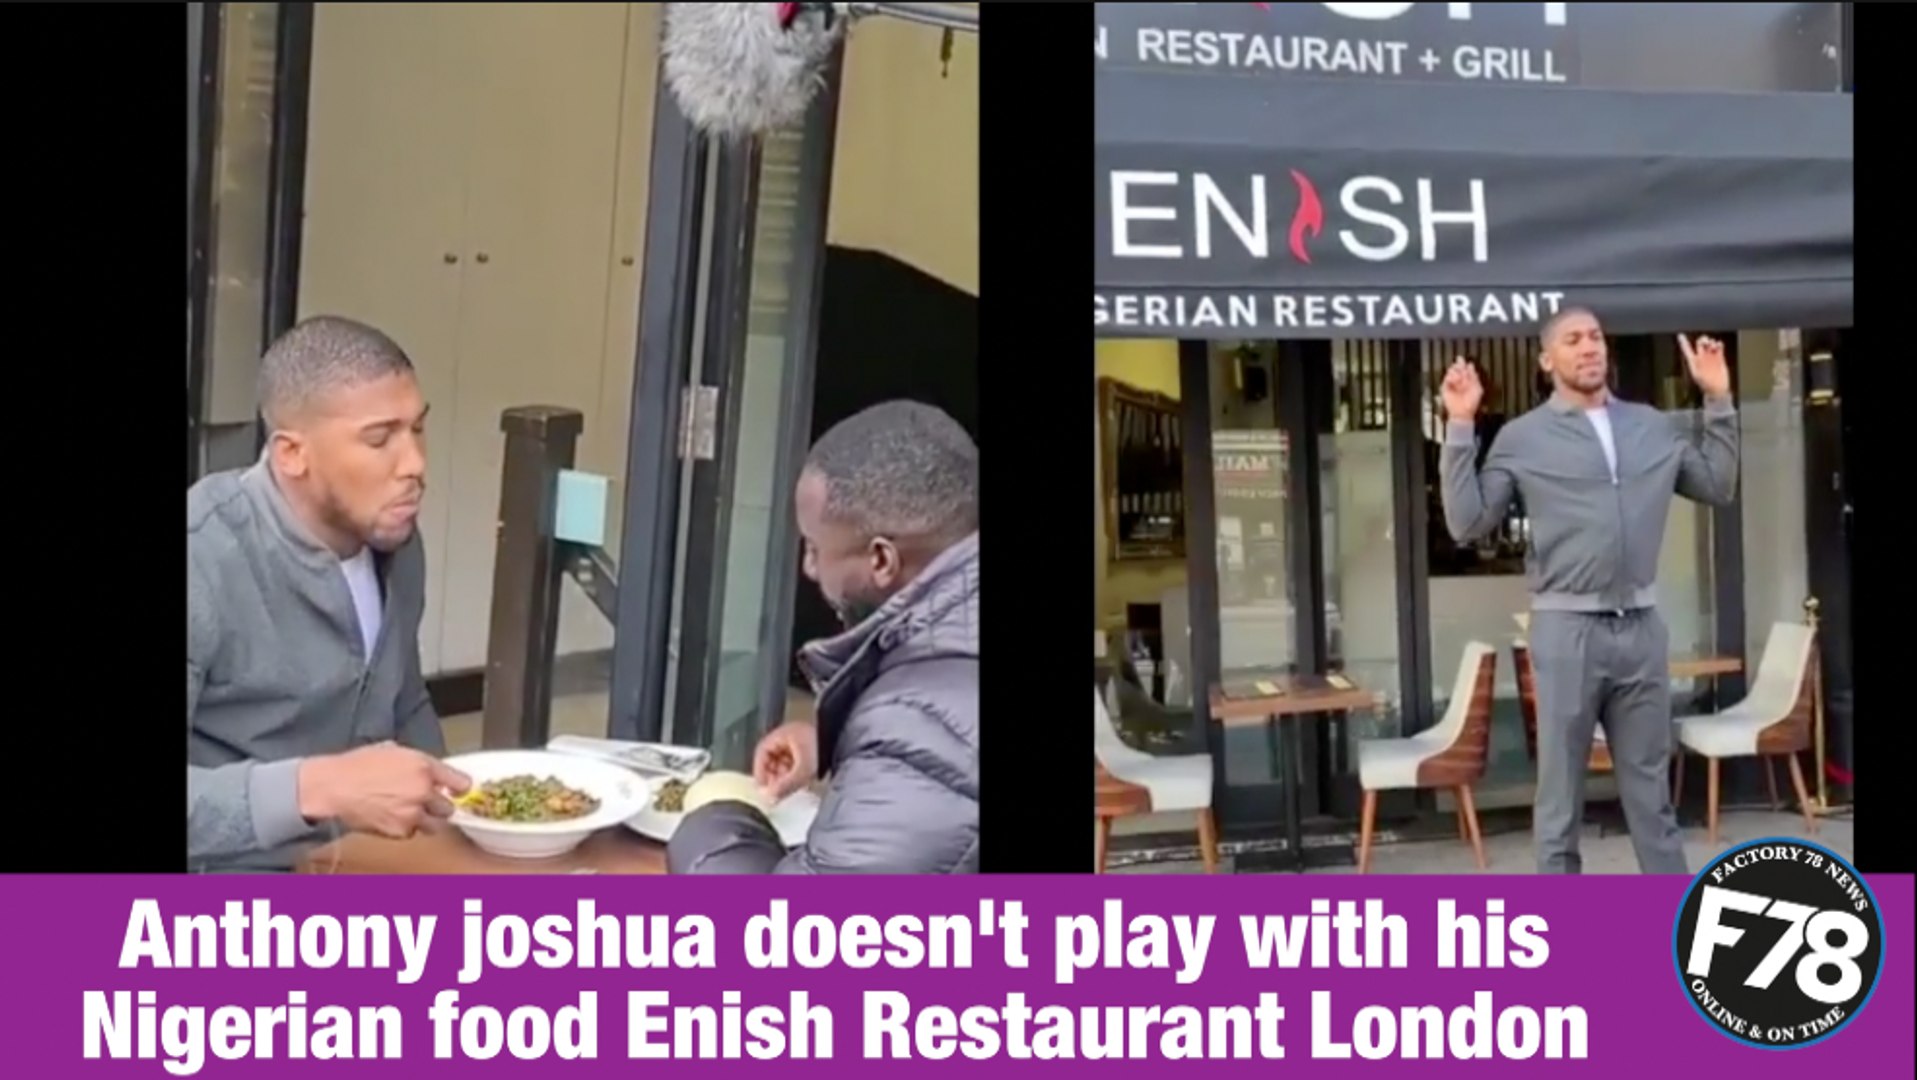 ⁣F78NEWS: Anthony joshua doesn't play with his Nigerian food Enish Restaurant London